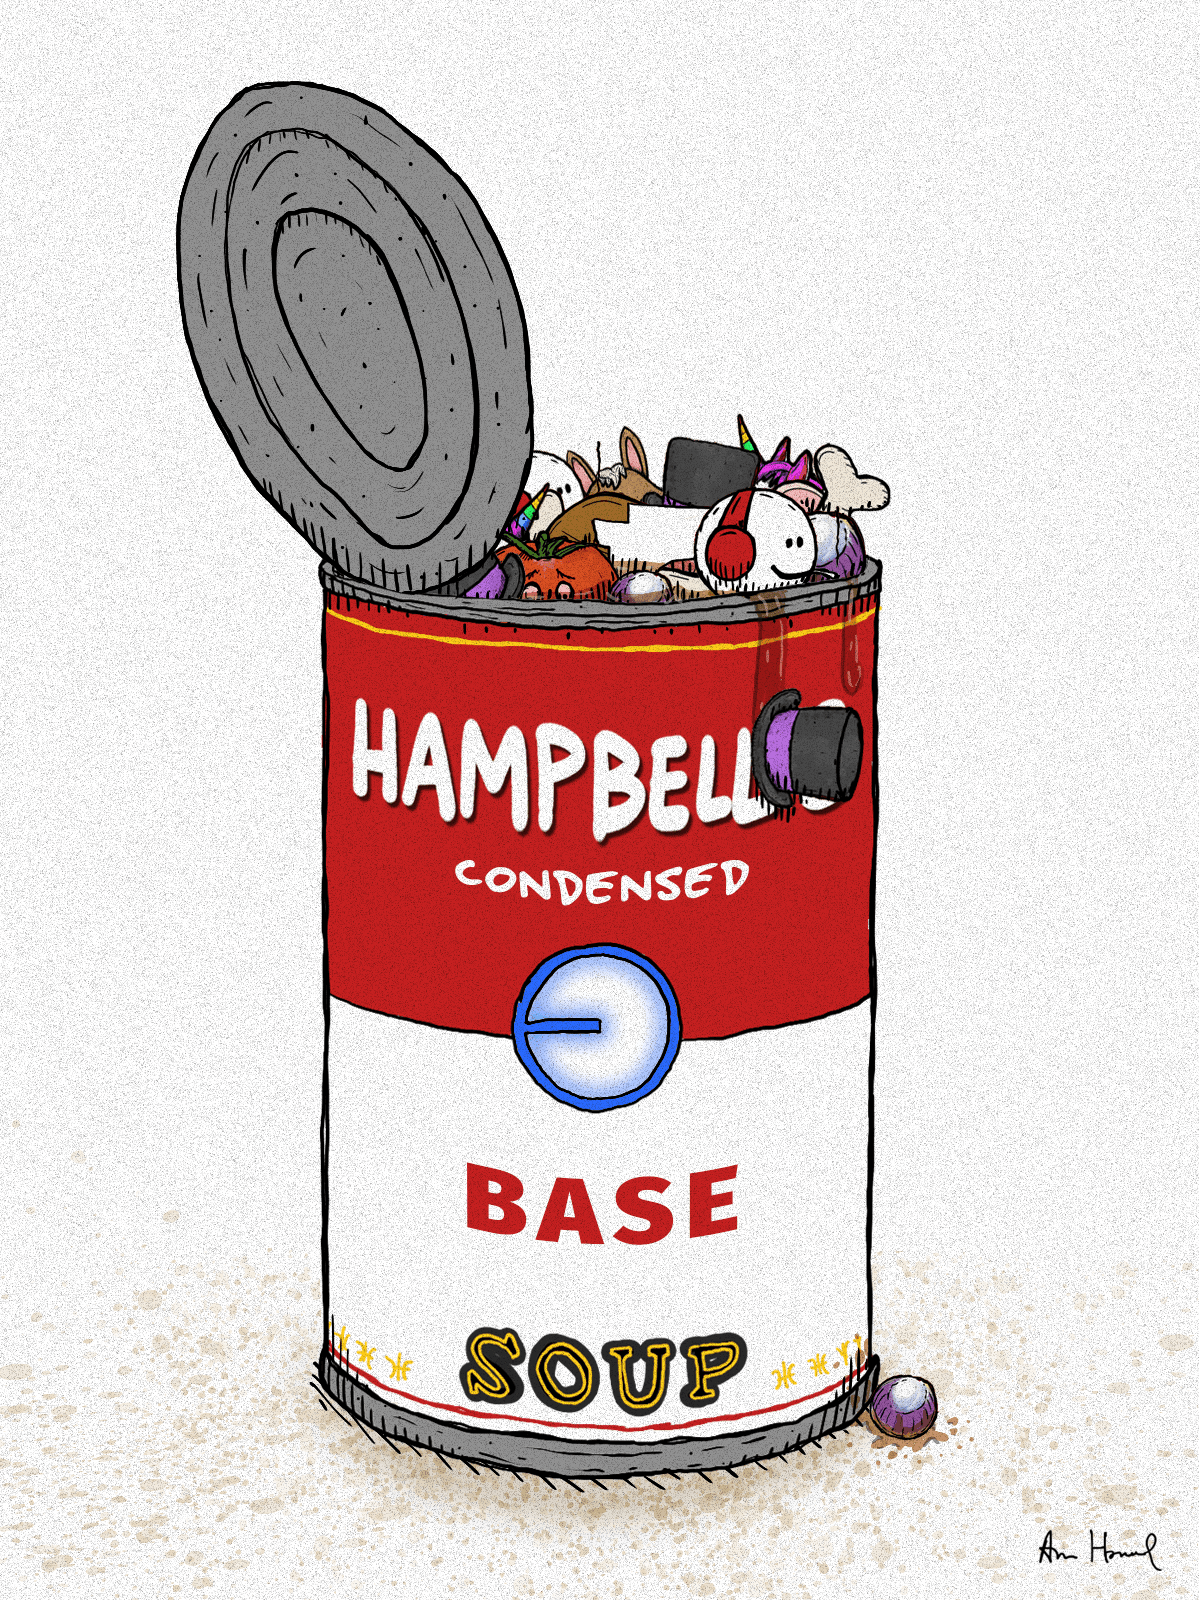 hampbell's condensed base soup (opened) #2388